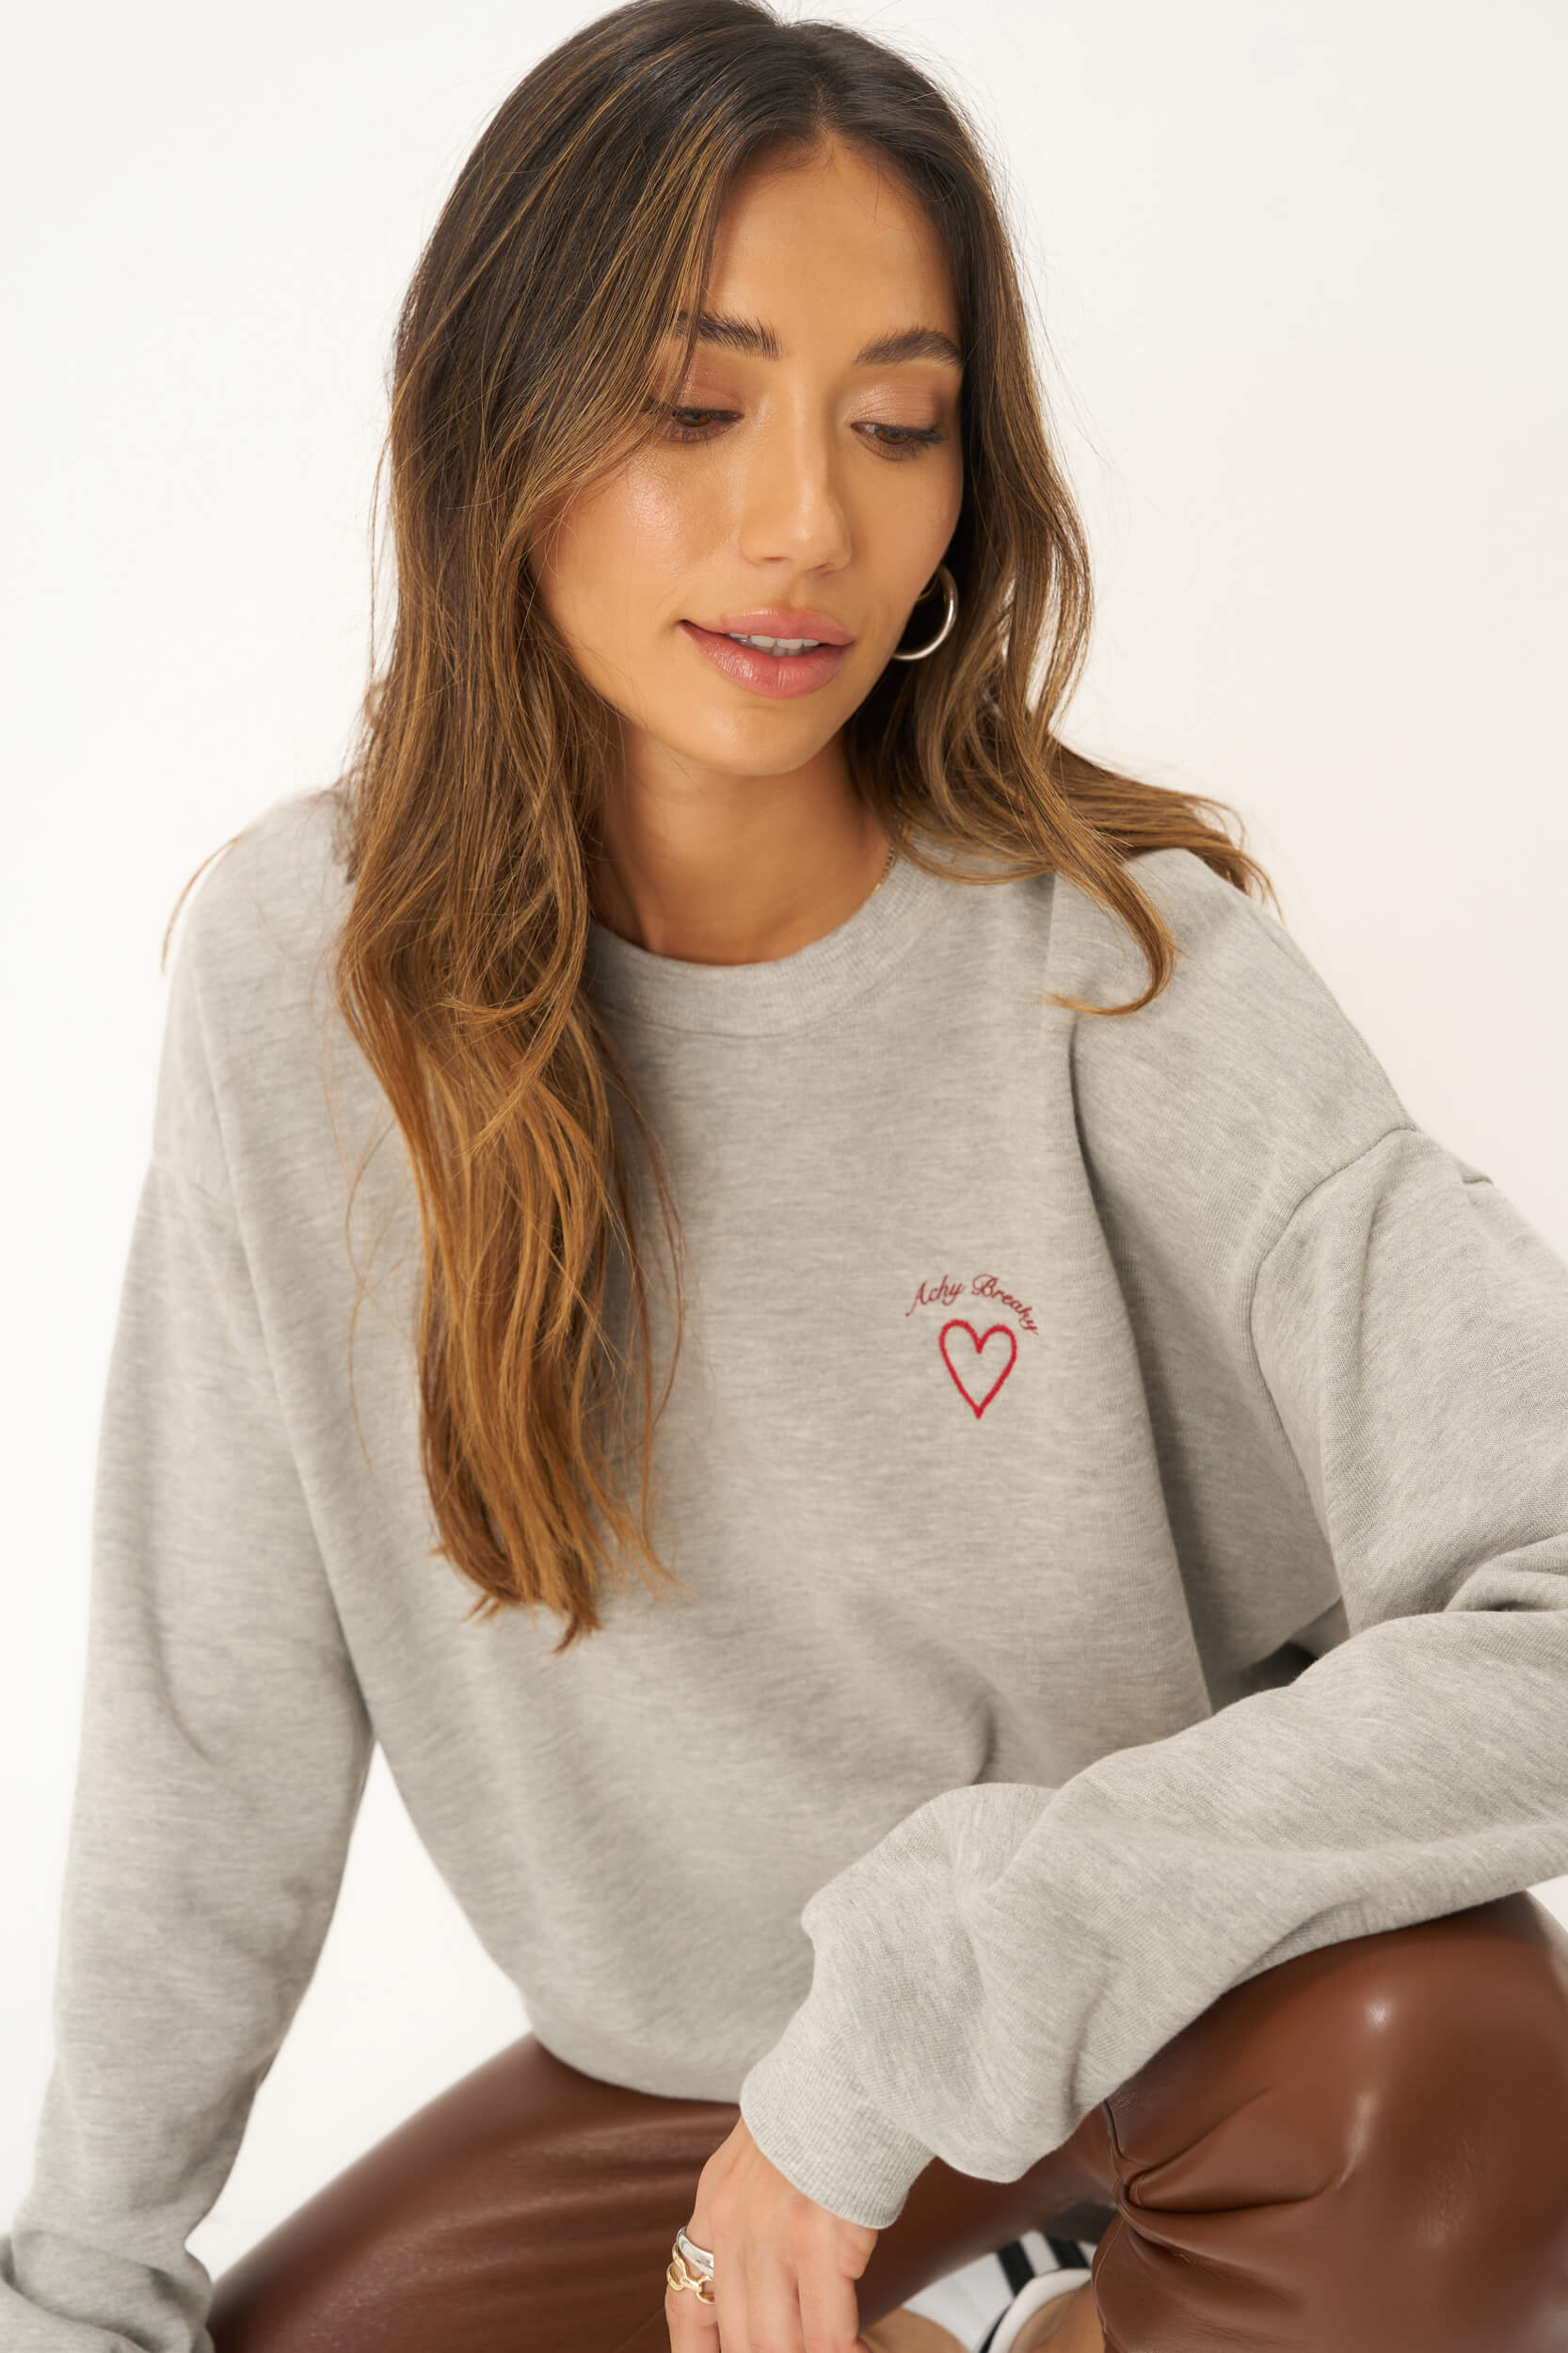 Achy Breaky Embroidered Sweatshirt - Grey – SOCIAL T PROJECT Heather